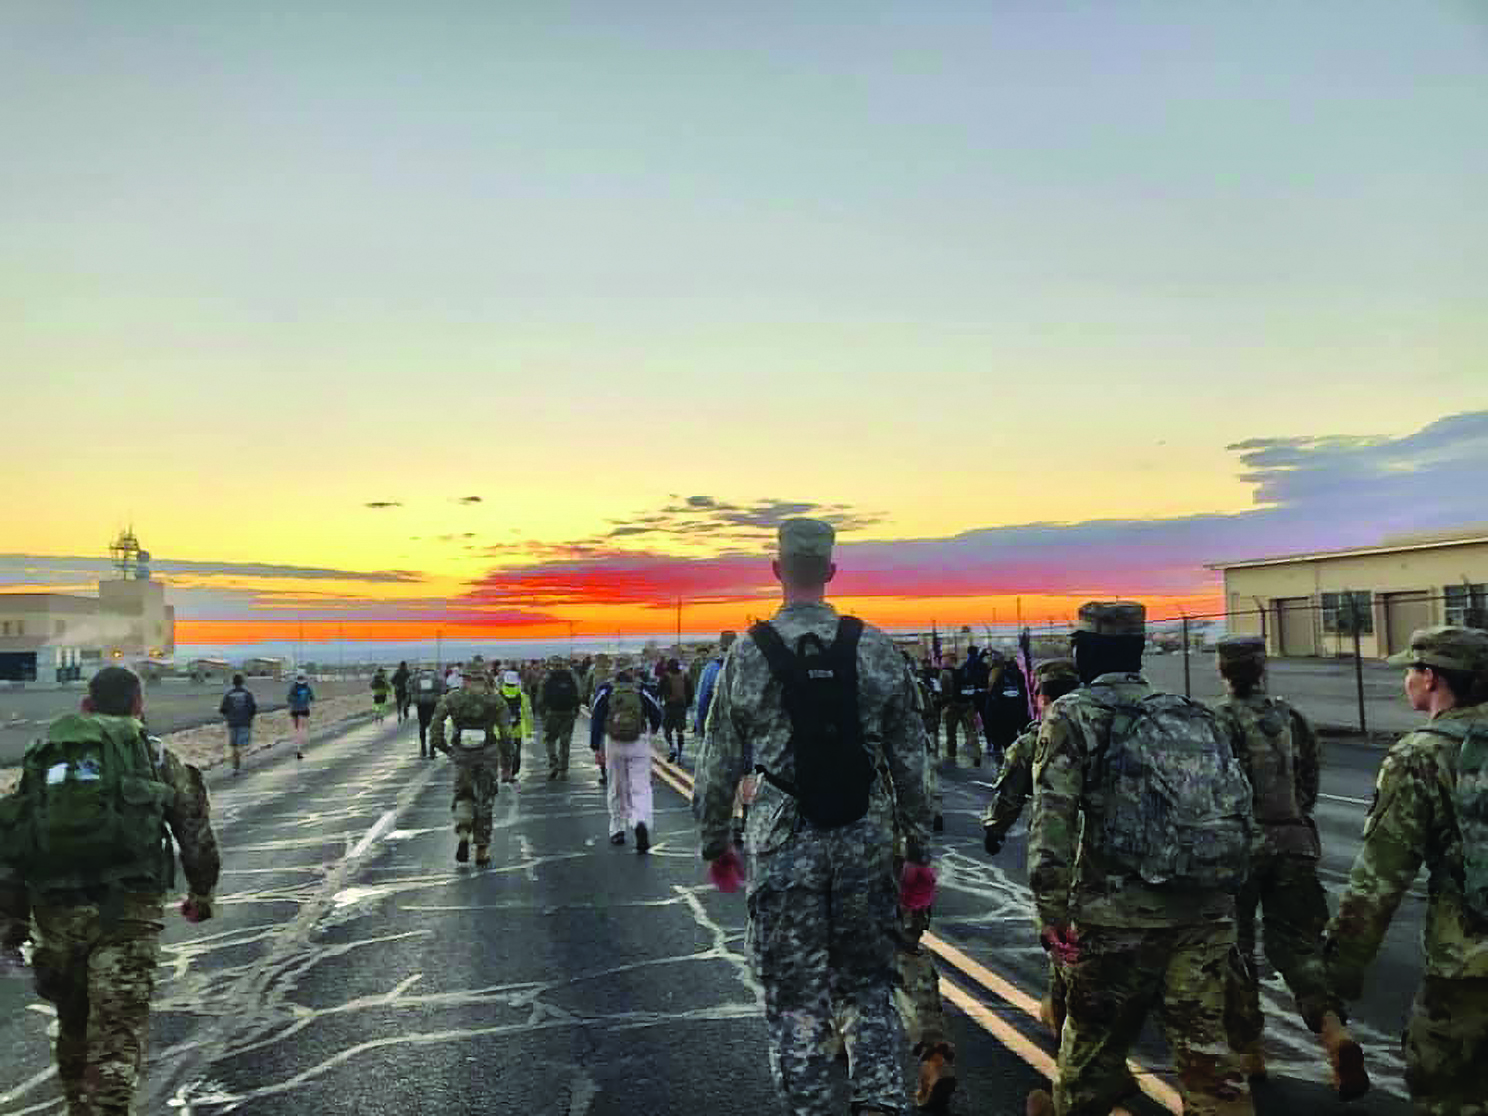 A stunning sunrise greeted the marchers at the 2019 Bataan Memorial Death March after it snowed the
        day prior. (Photo courtesy of COL Ku)